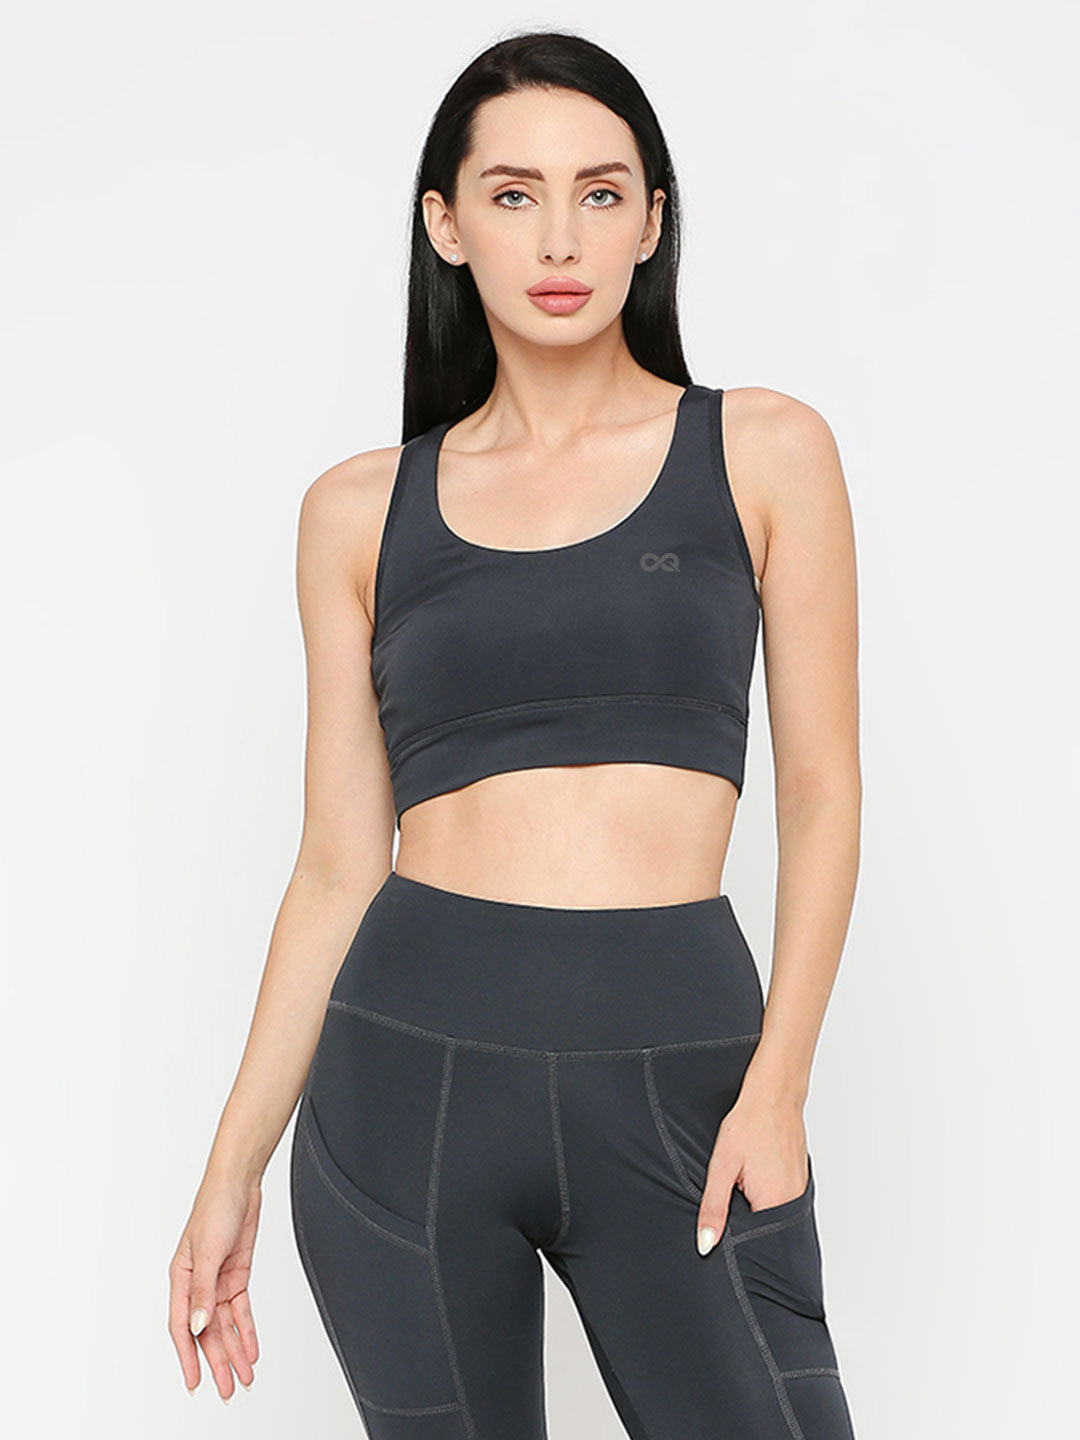 Women's Black Racerback Sports Bra - Stay Supported and Stylish